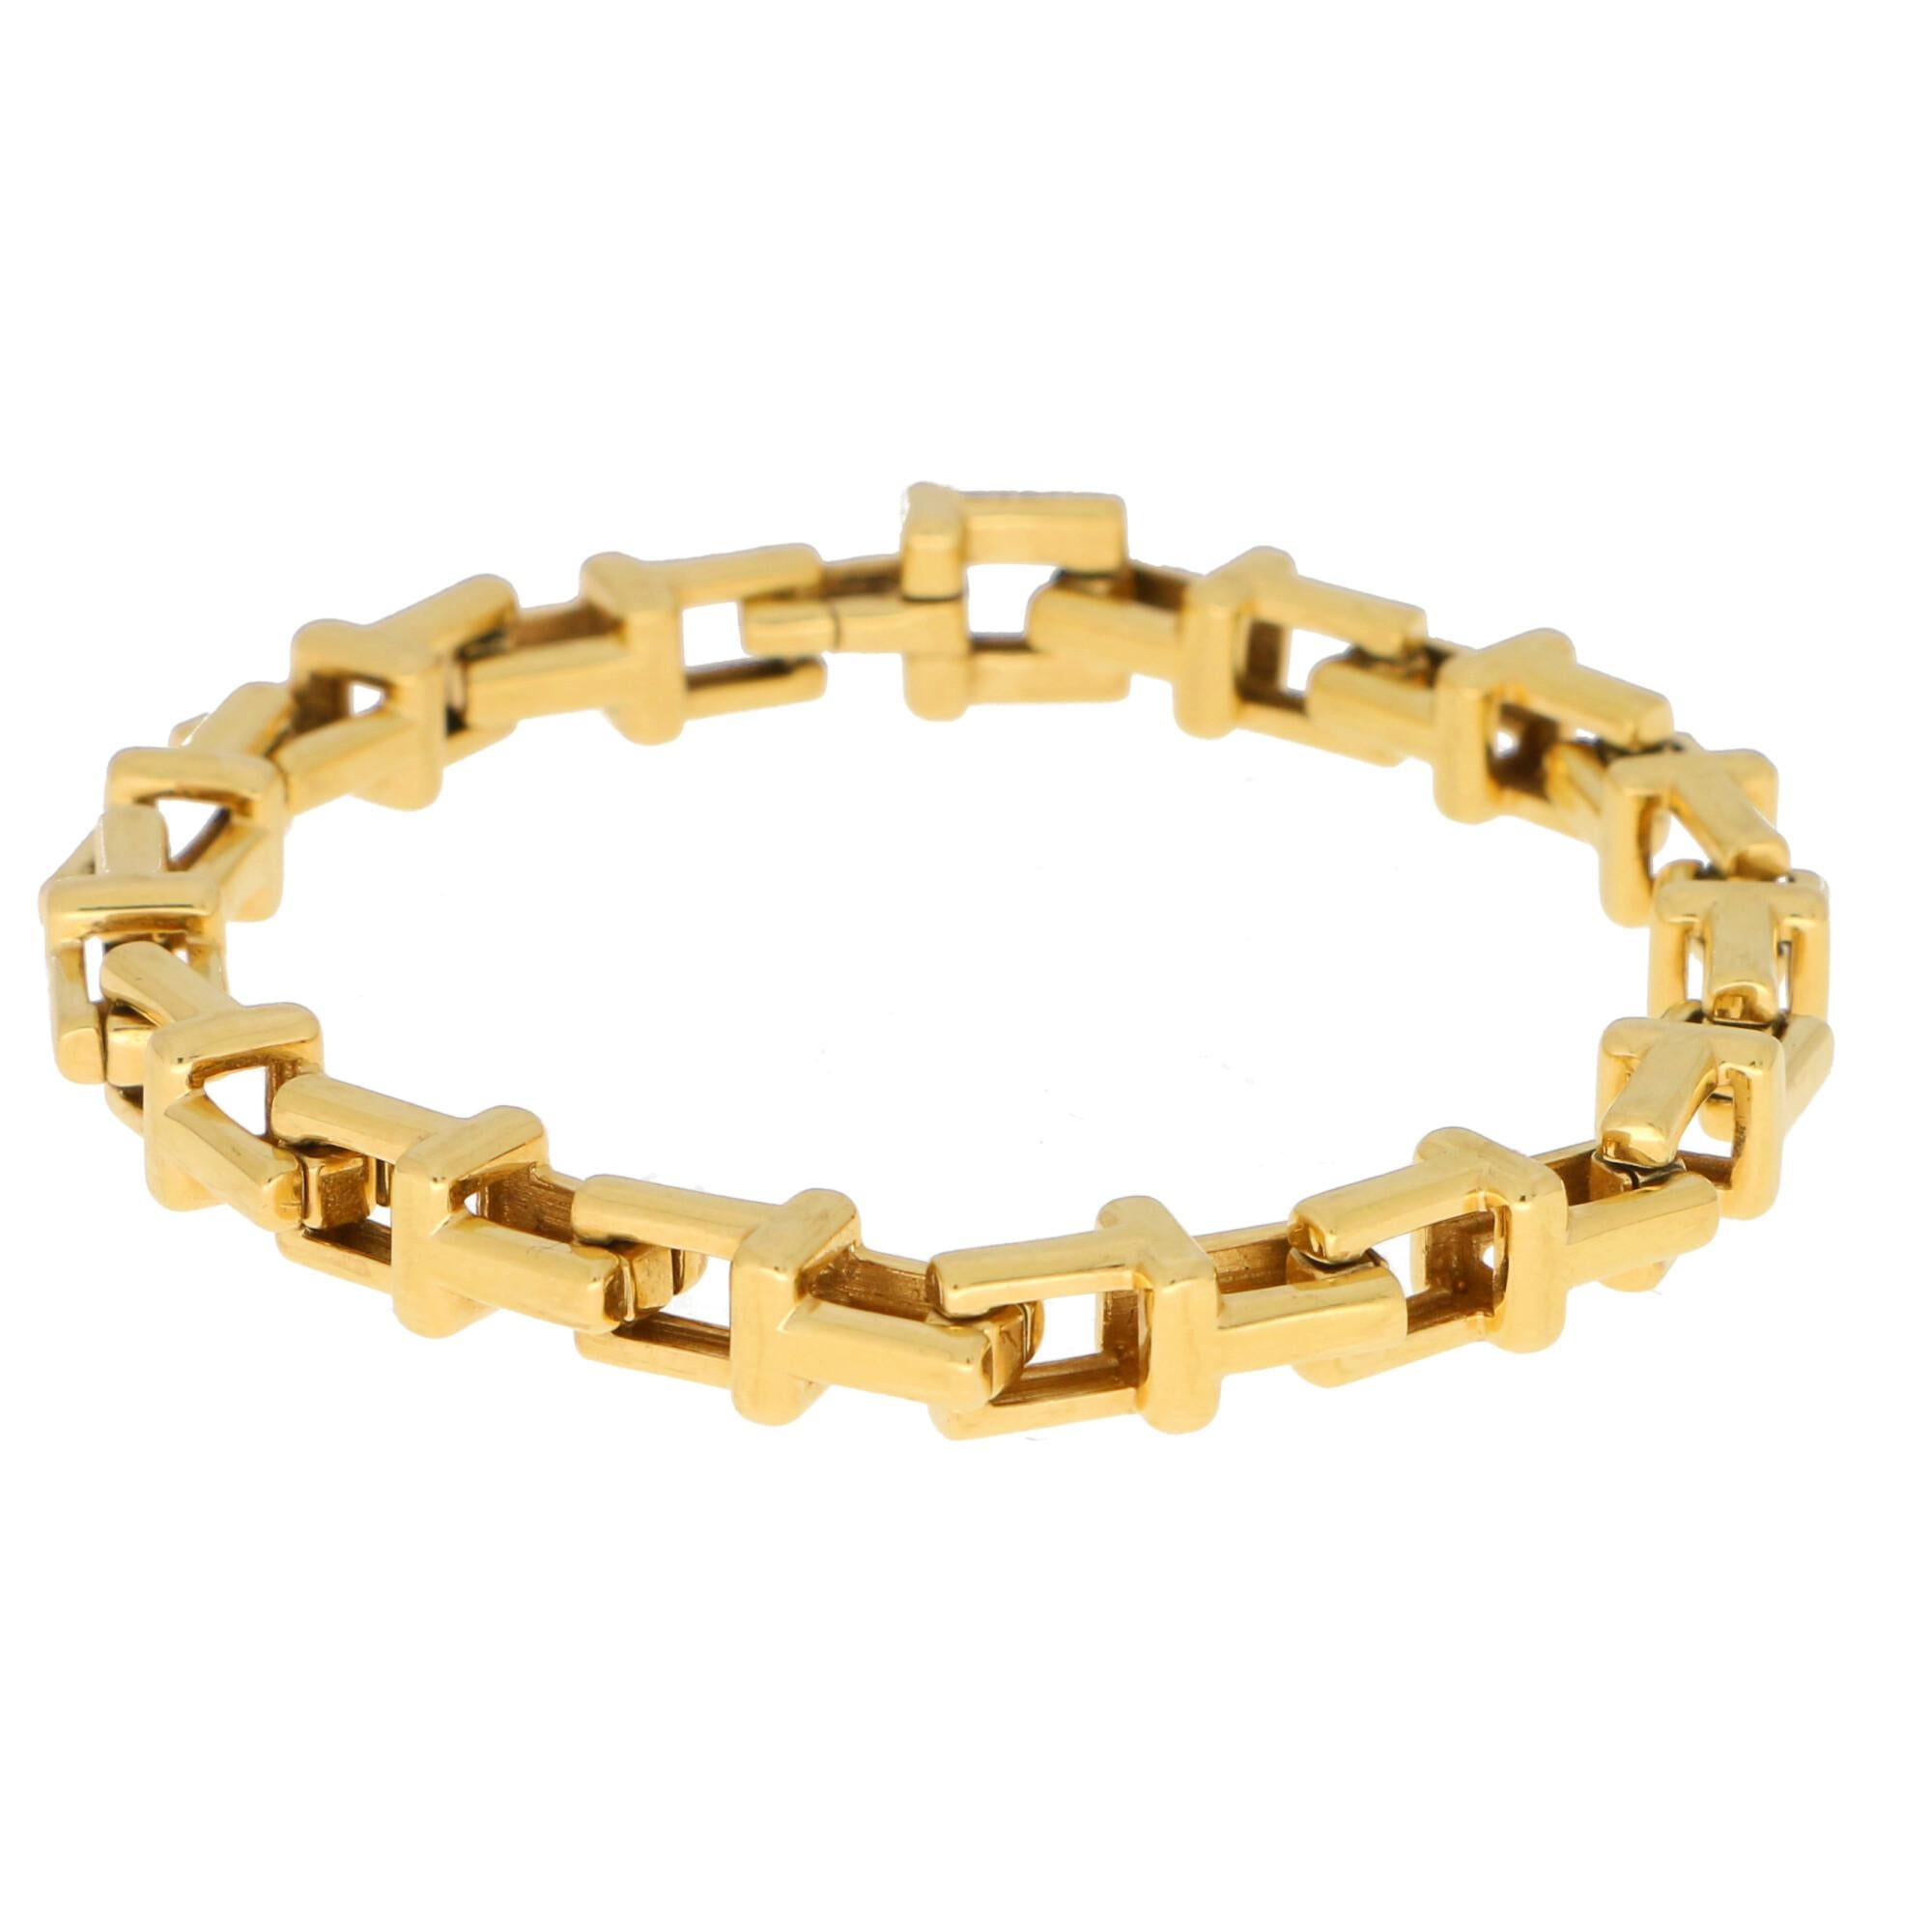 A simple yet elegant chunky Tiffany T medium sized chain link bracelet set in solid 18k yellow gold.

The bracelet is composed of 15 solid double-sided links in the iconic Tiffany T motif. These links are of a decent size so that the wearer has the